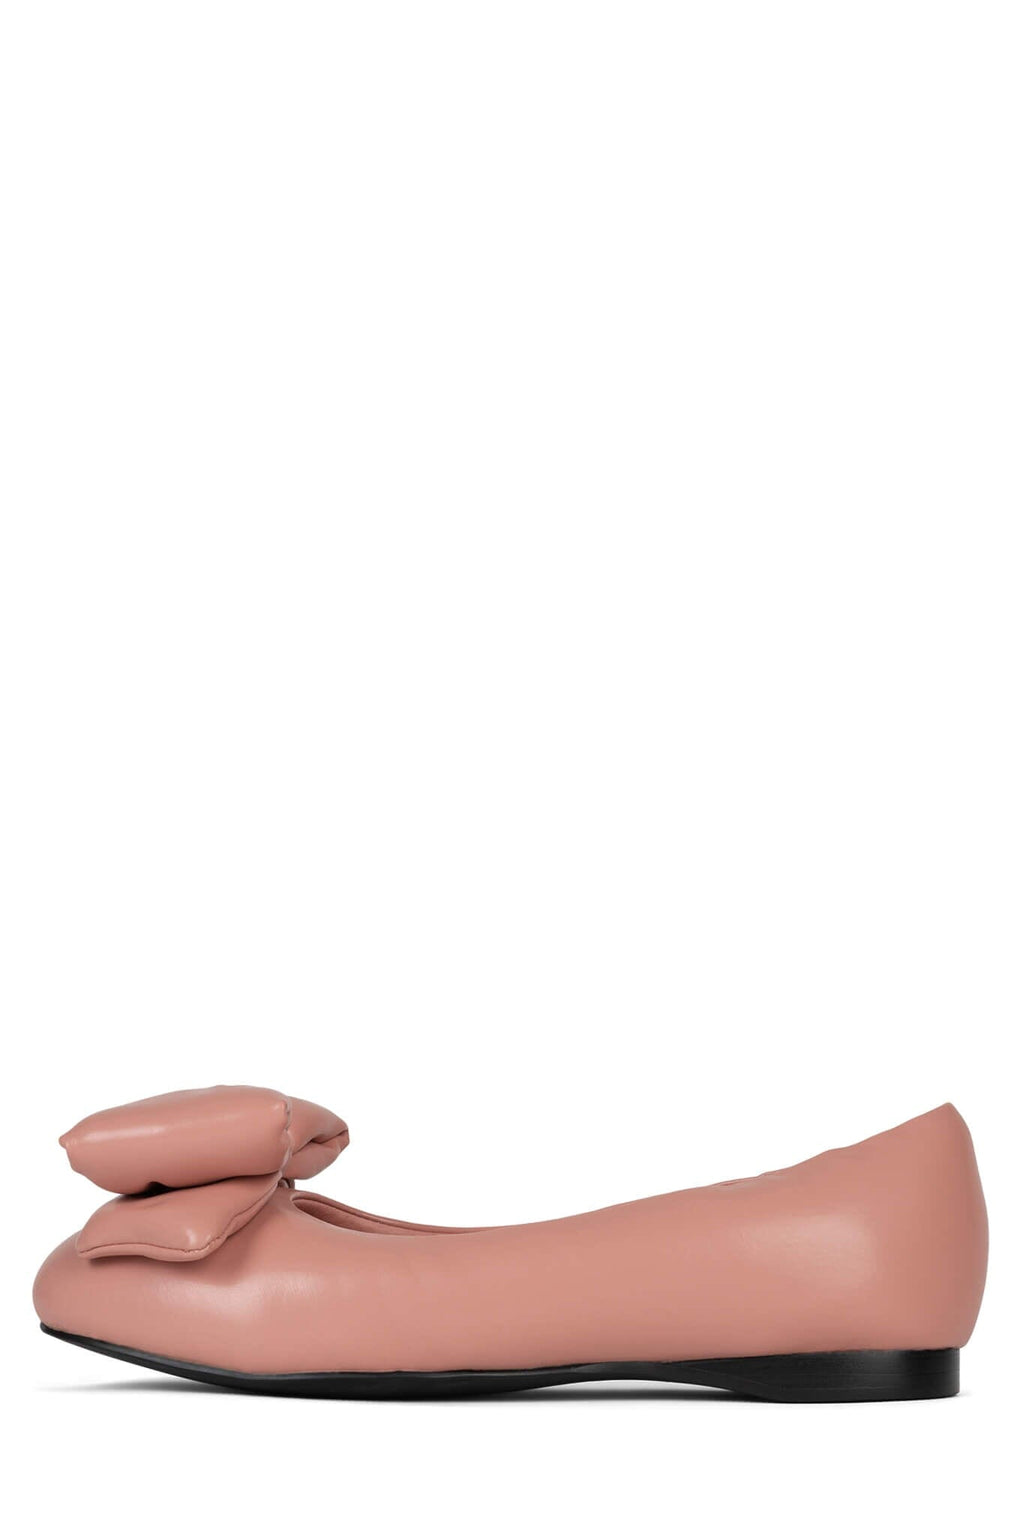 BOW-OUT Jeffrey Campbell Pink 6 